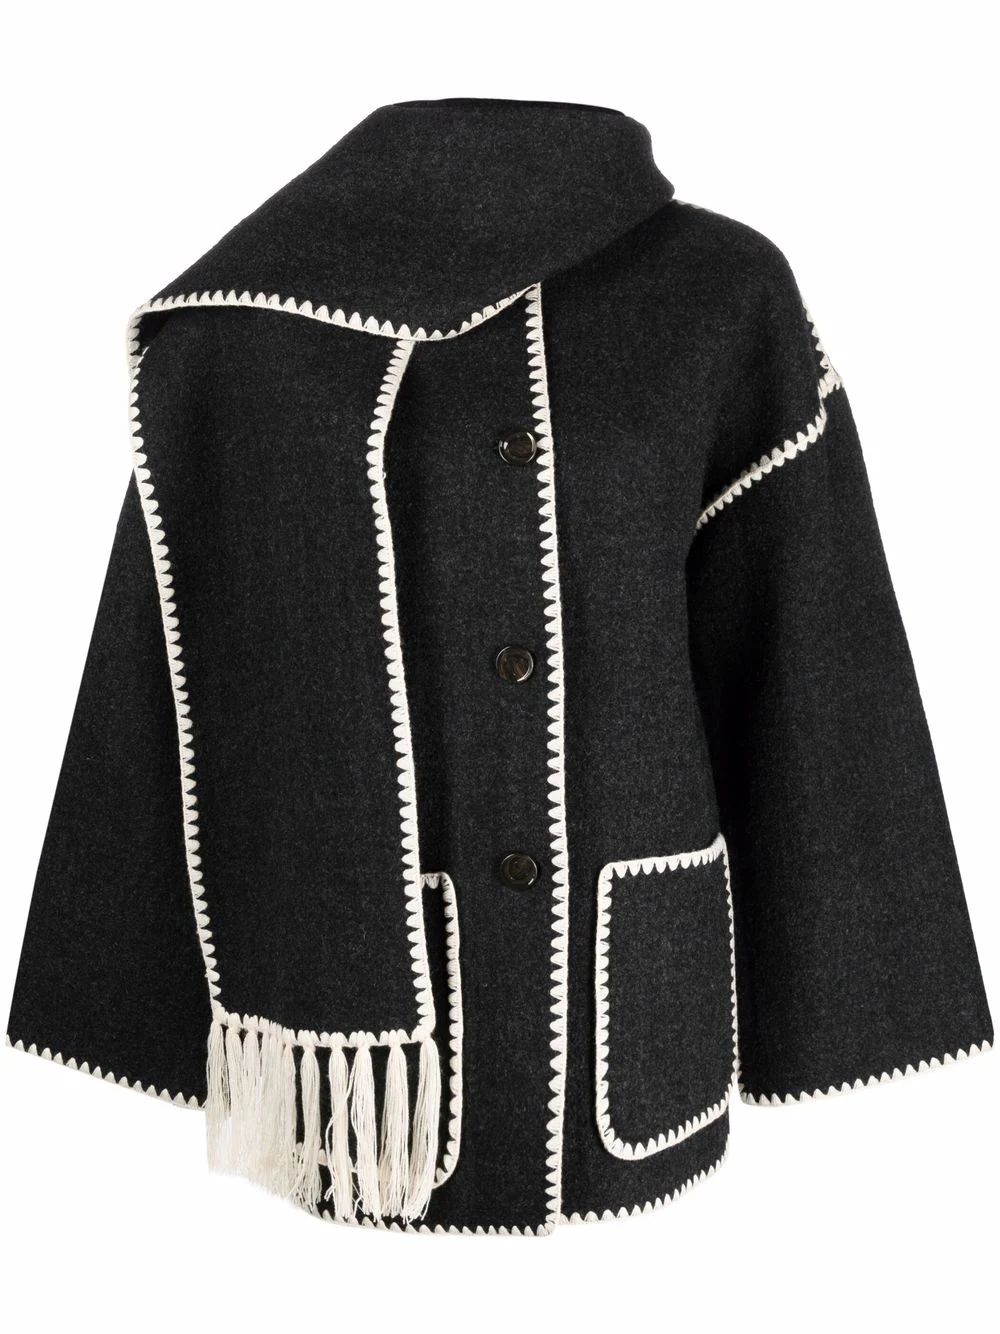 embroidered scarf jacket | Farfetch Global